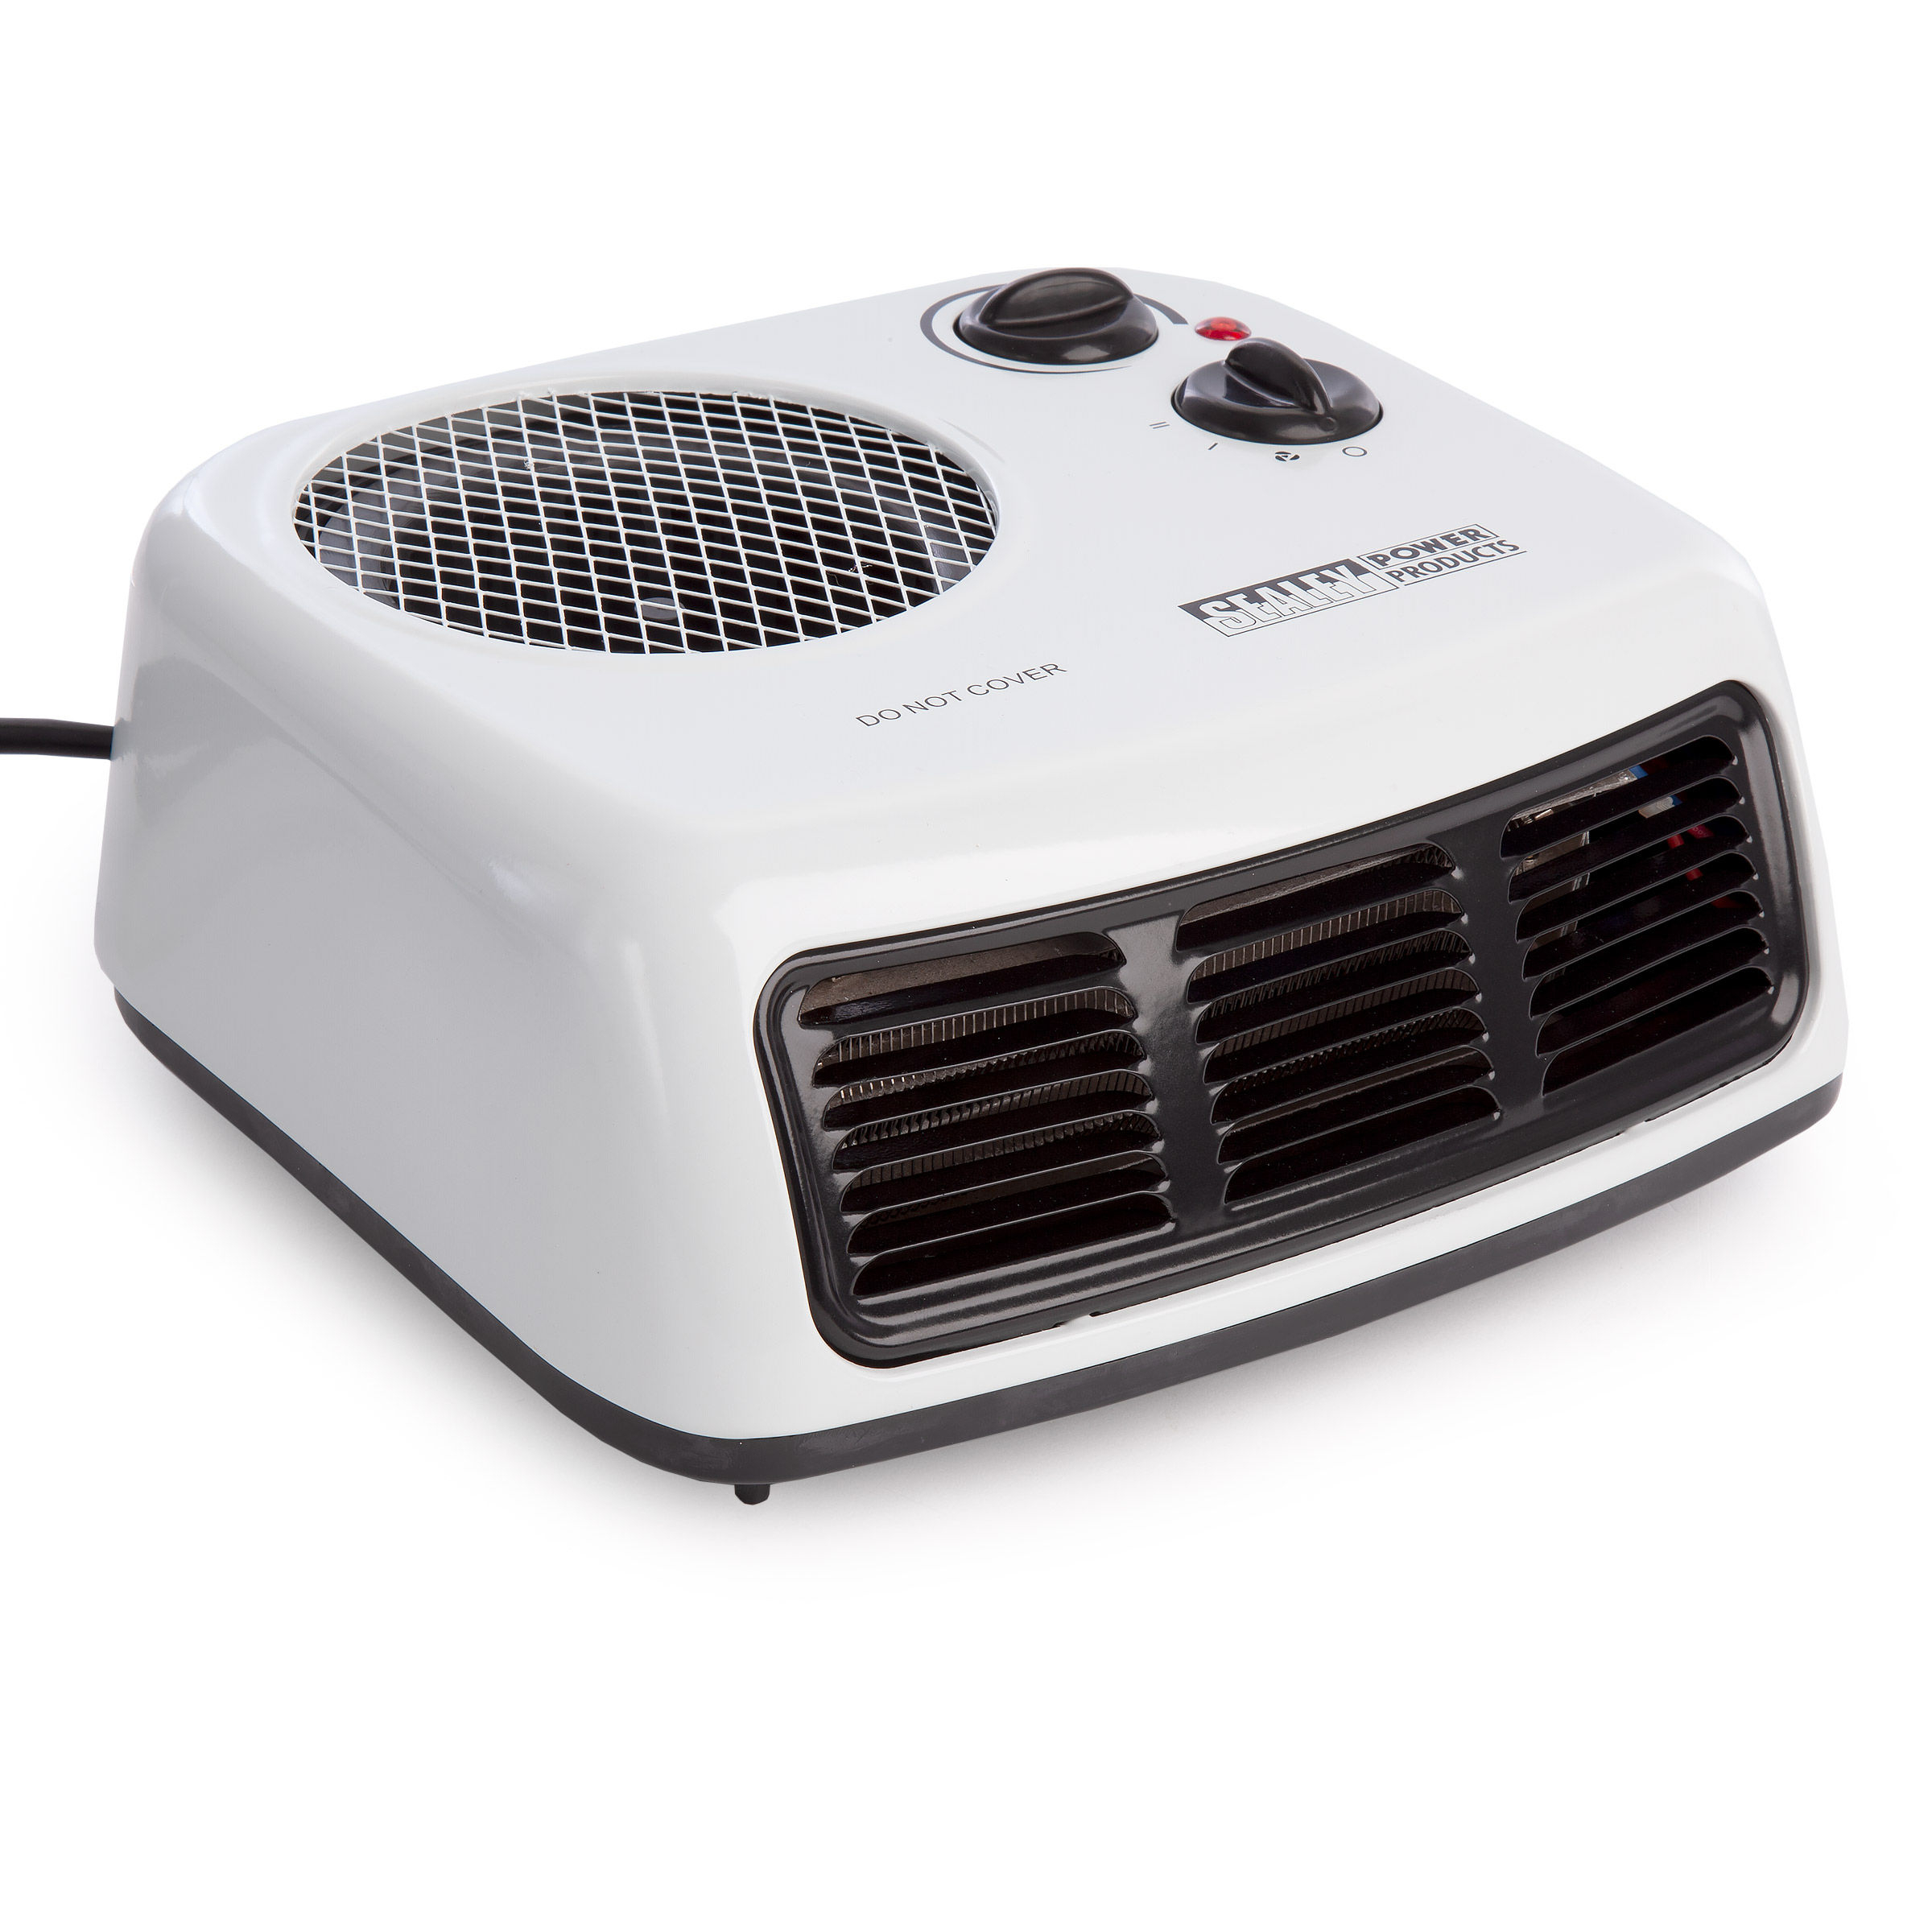 Sealey Fh2009 Fan Heater 2 Heat Settings With Thermostat 2000w 240v regarding proportions 2400 X 2400